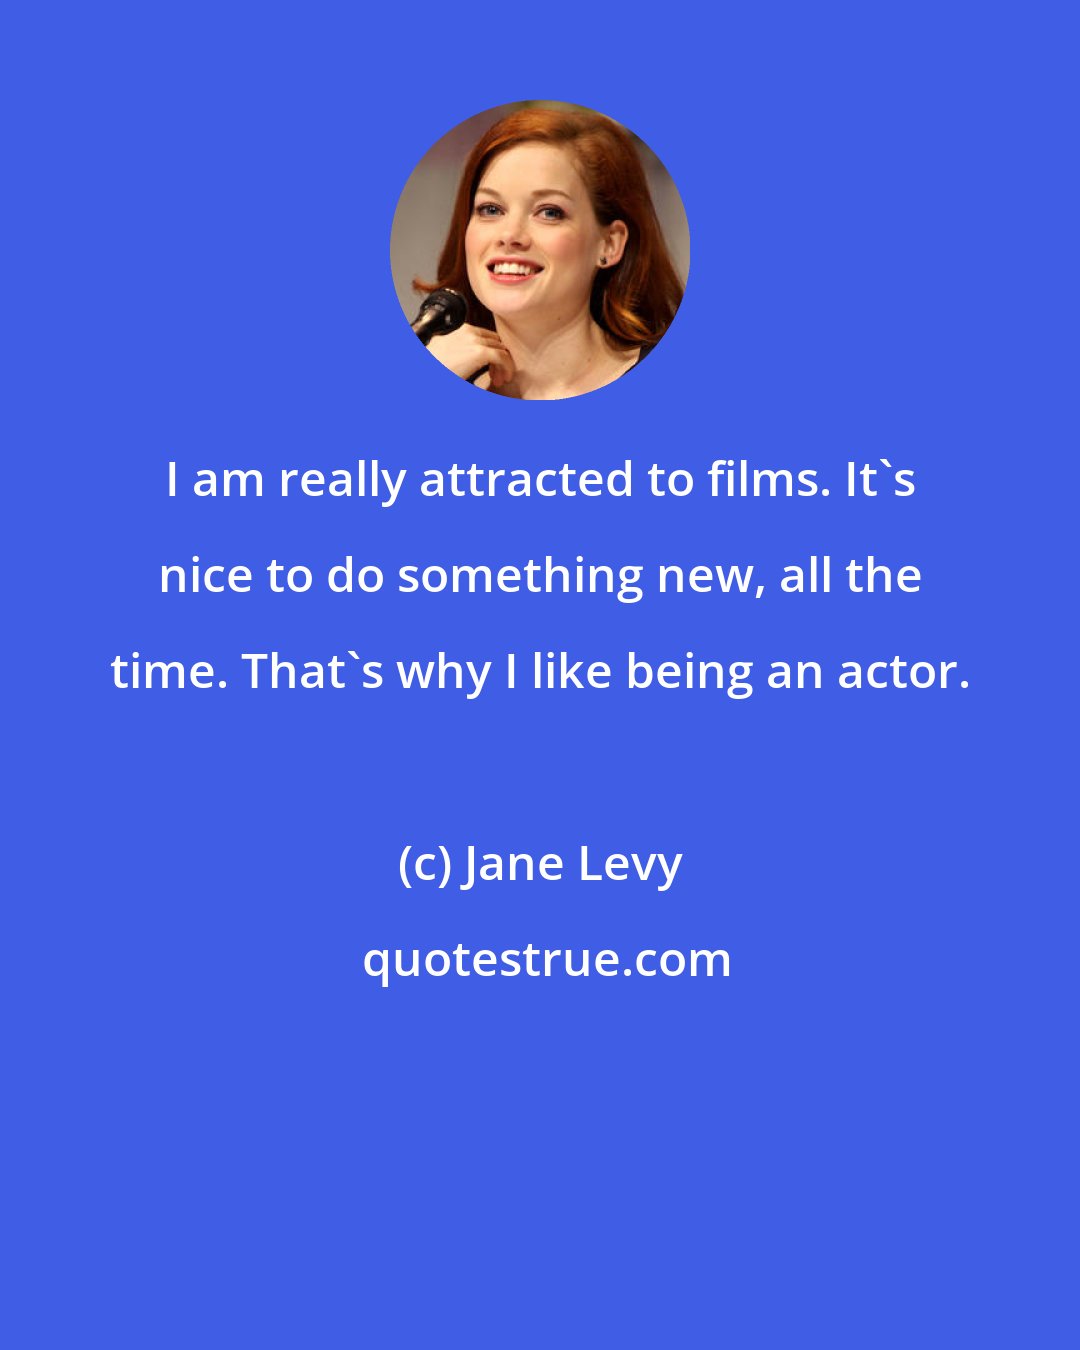 Jane Levy: I am really attracted to films. It's nice to do something new, all the time. That's why I like being an actor.